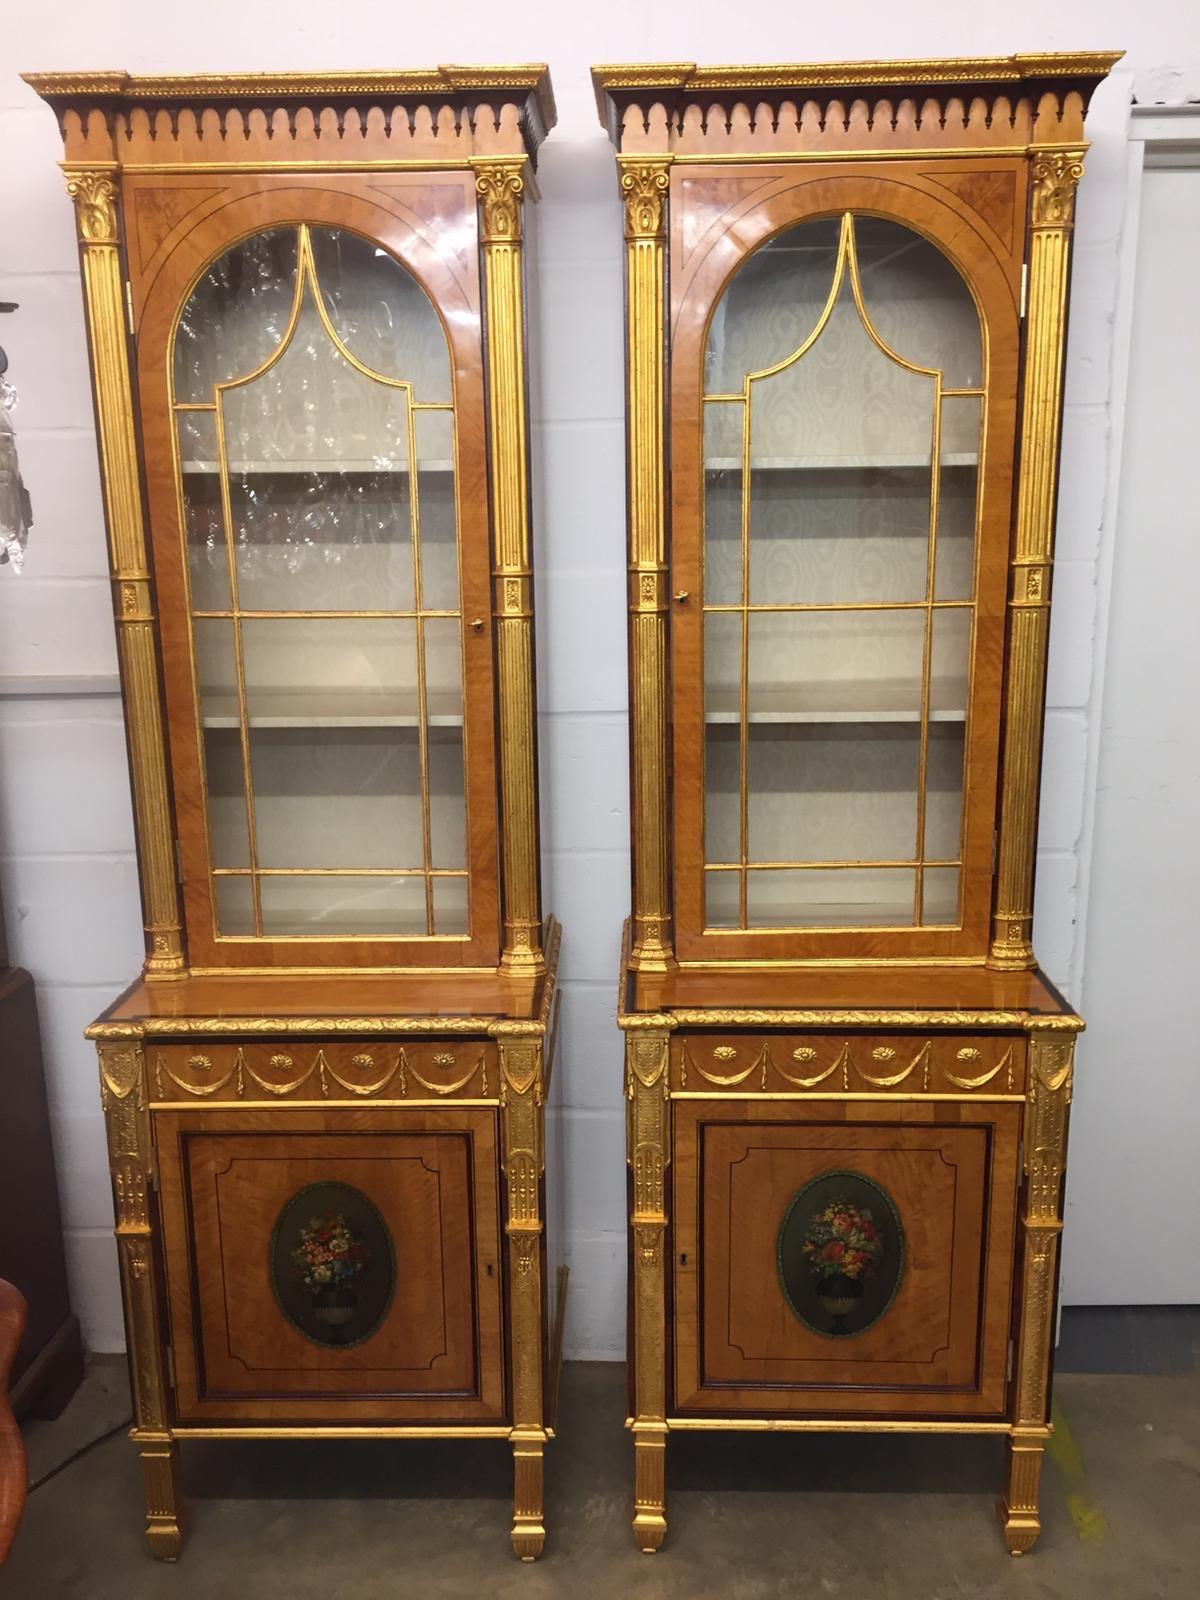 A pair of George III period cabinet, circa 1790s, in satinwood and decorated with painted oval of vases of flowers, gilt pilasters ...fantastic, very rare and beautiful. 
Who want a unique cabinet? Here they are!